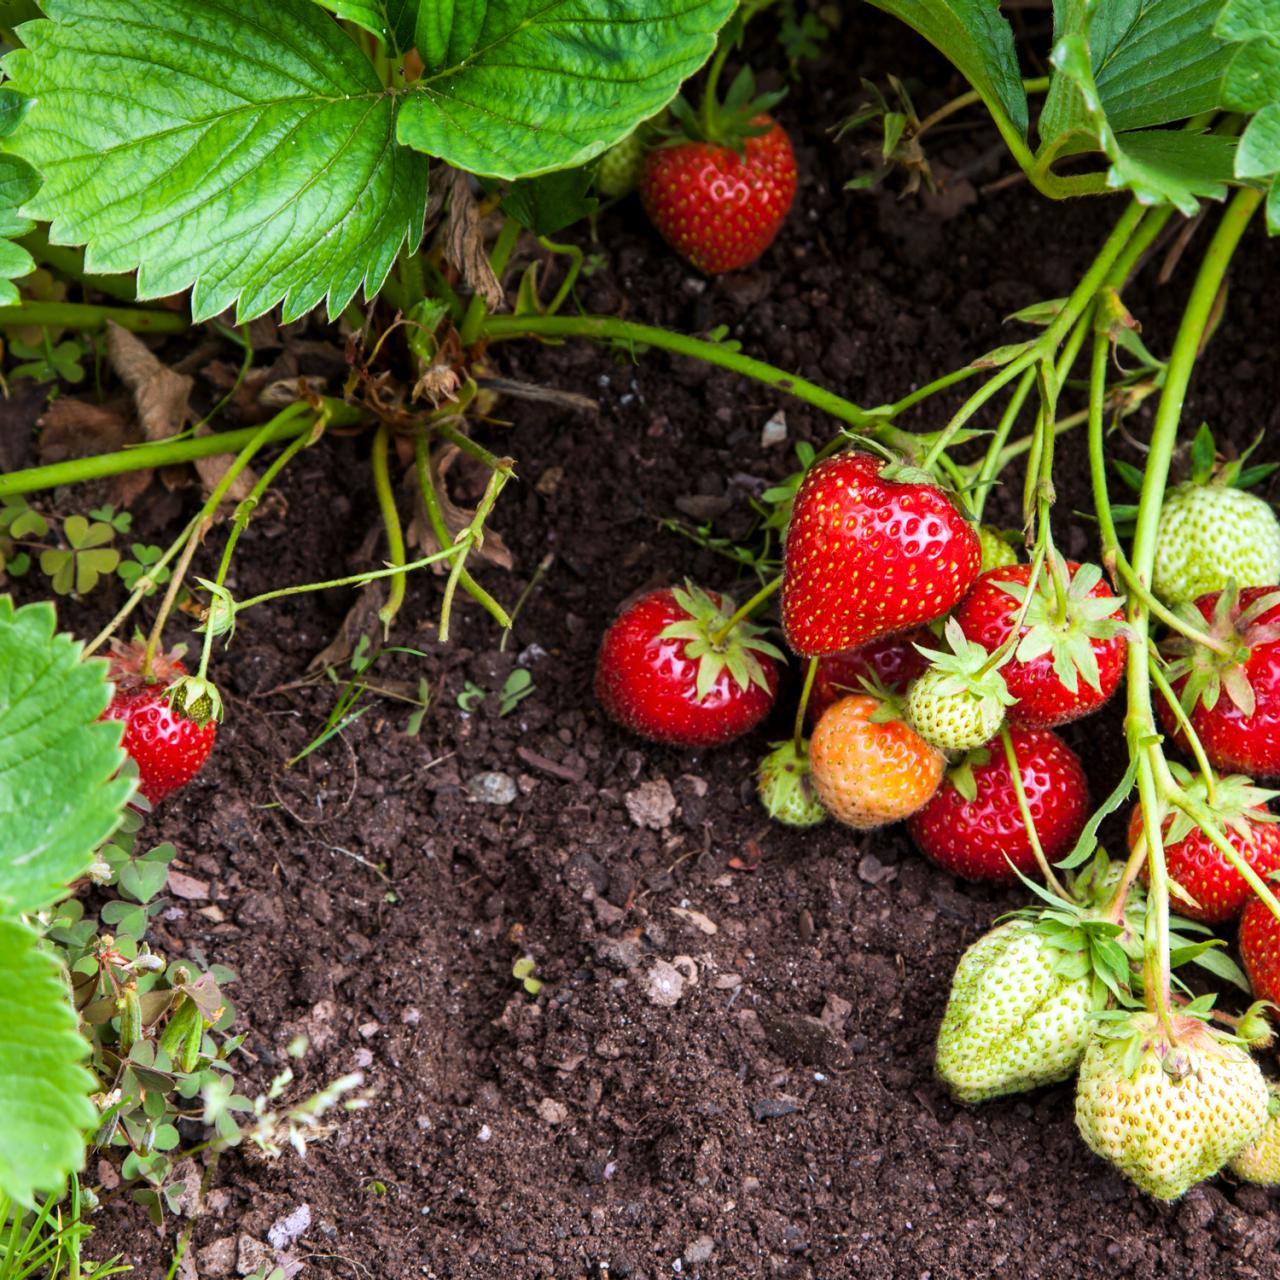 Cover strawberries with straw for the winter